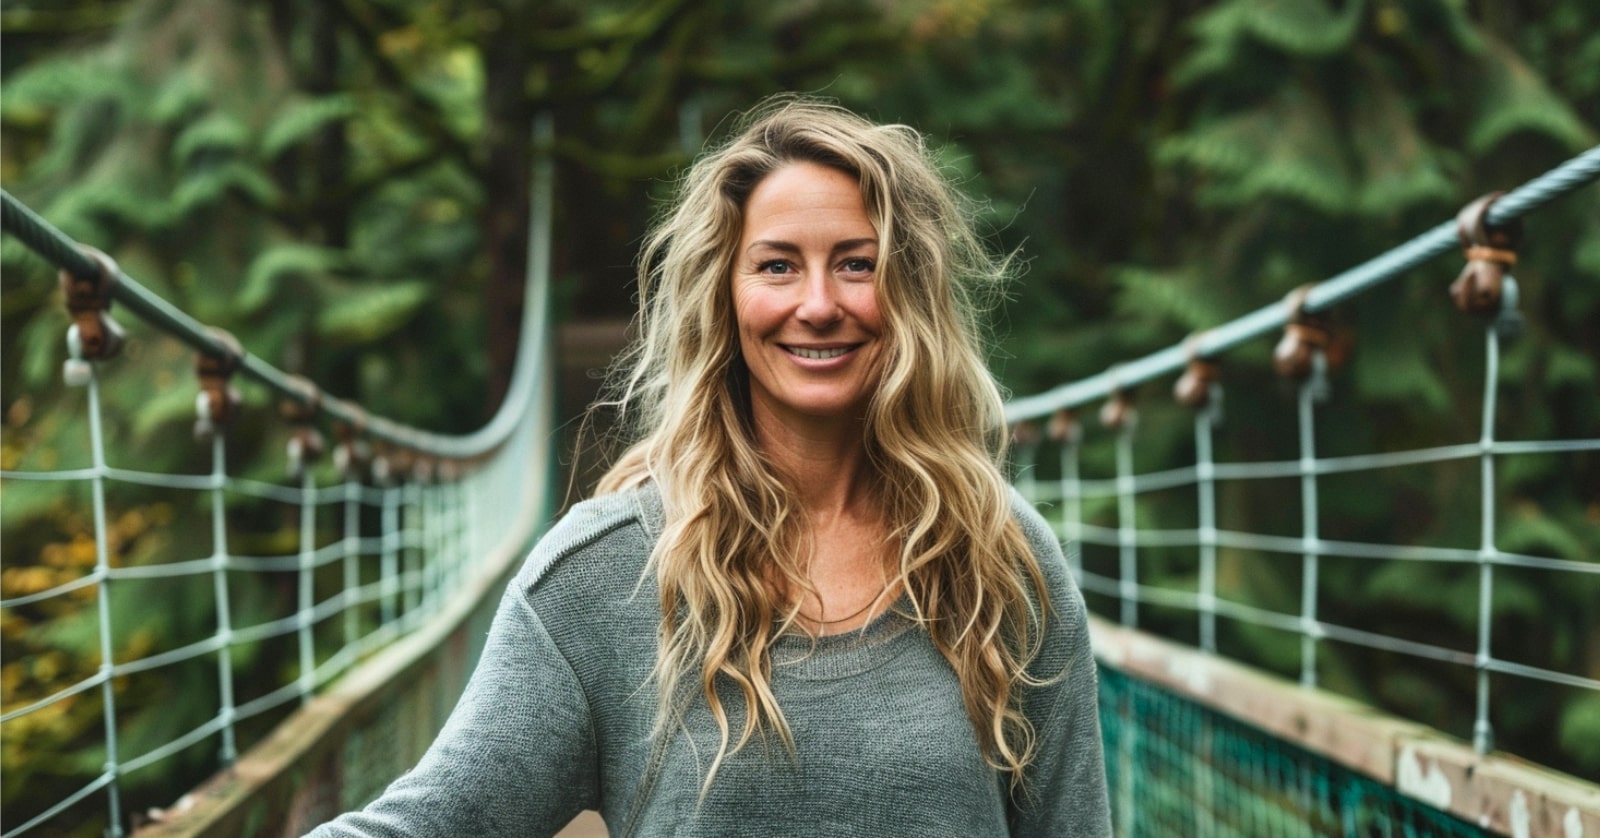 a woman in her 40s wearing natural comfortable clothing stands on a bridge with trees in the background